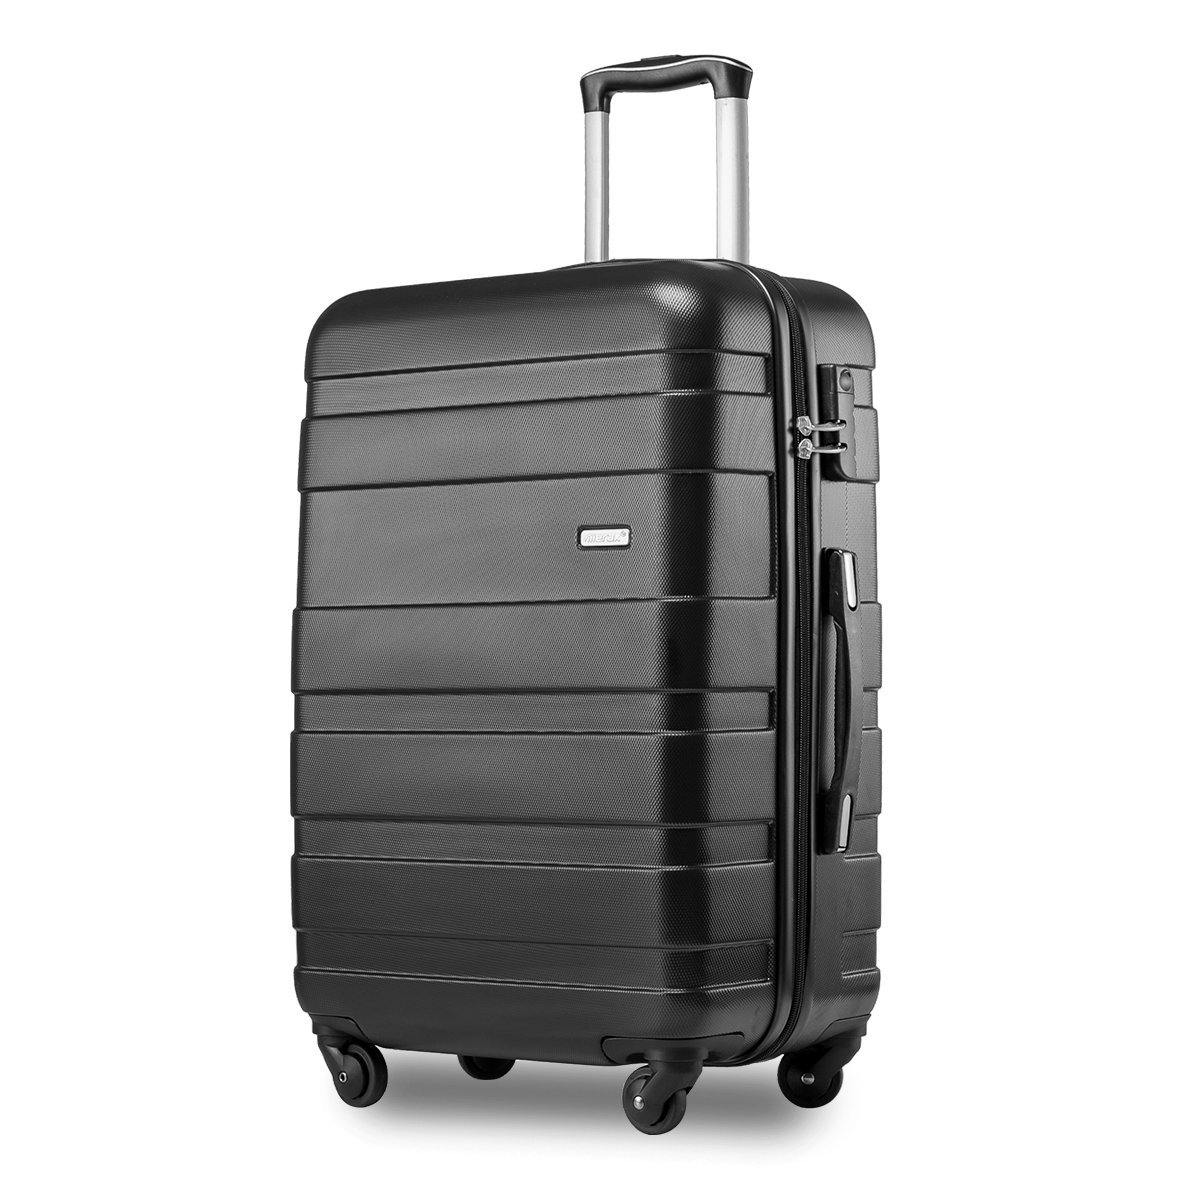 Merax Super Lightweight Hard Shell Luggage Review